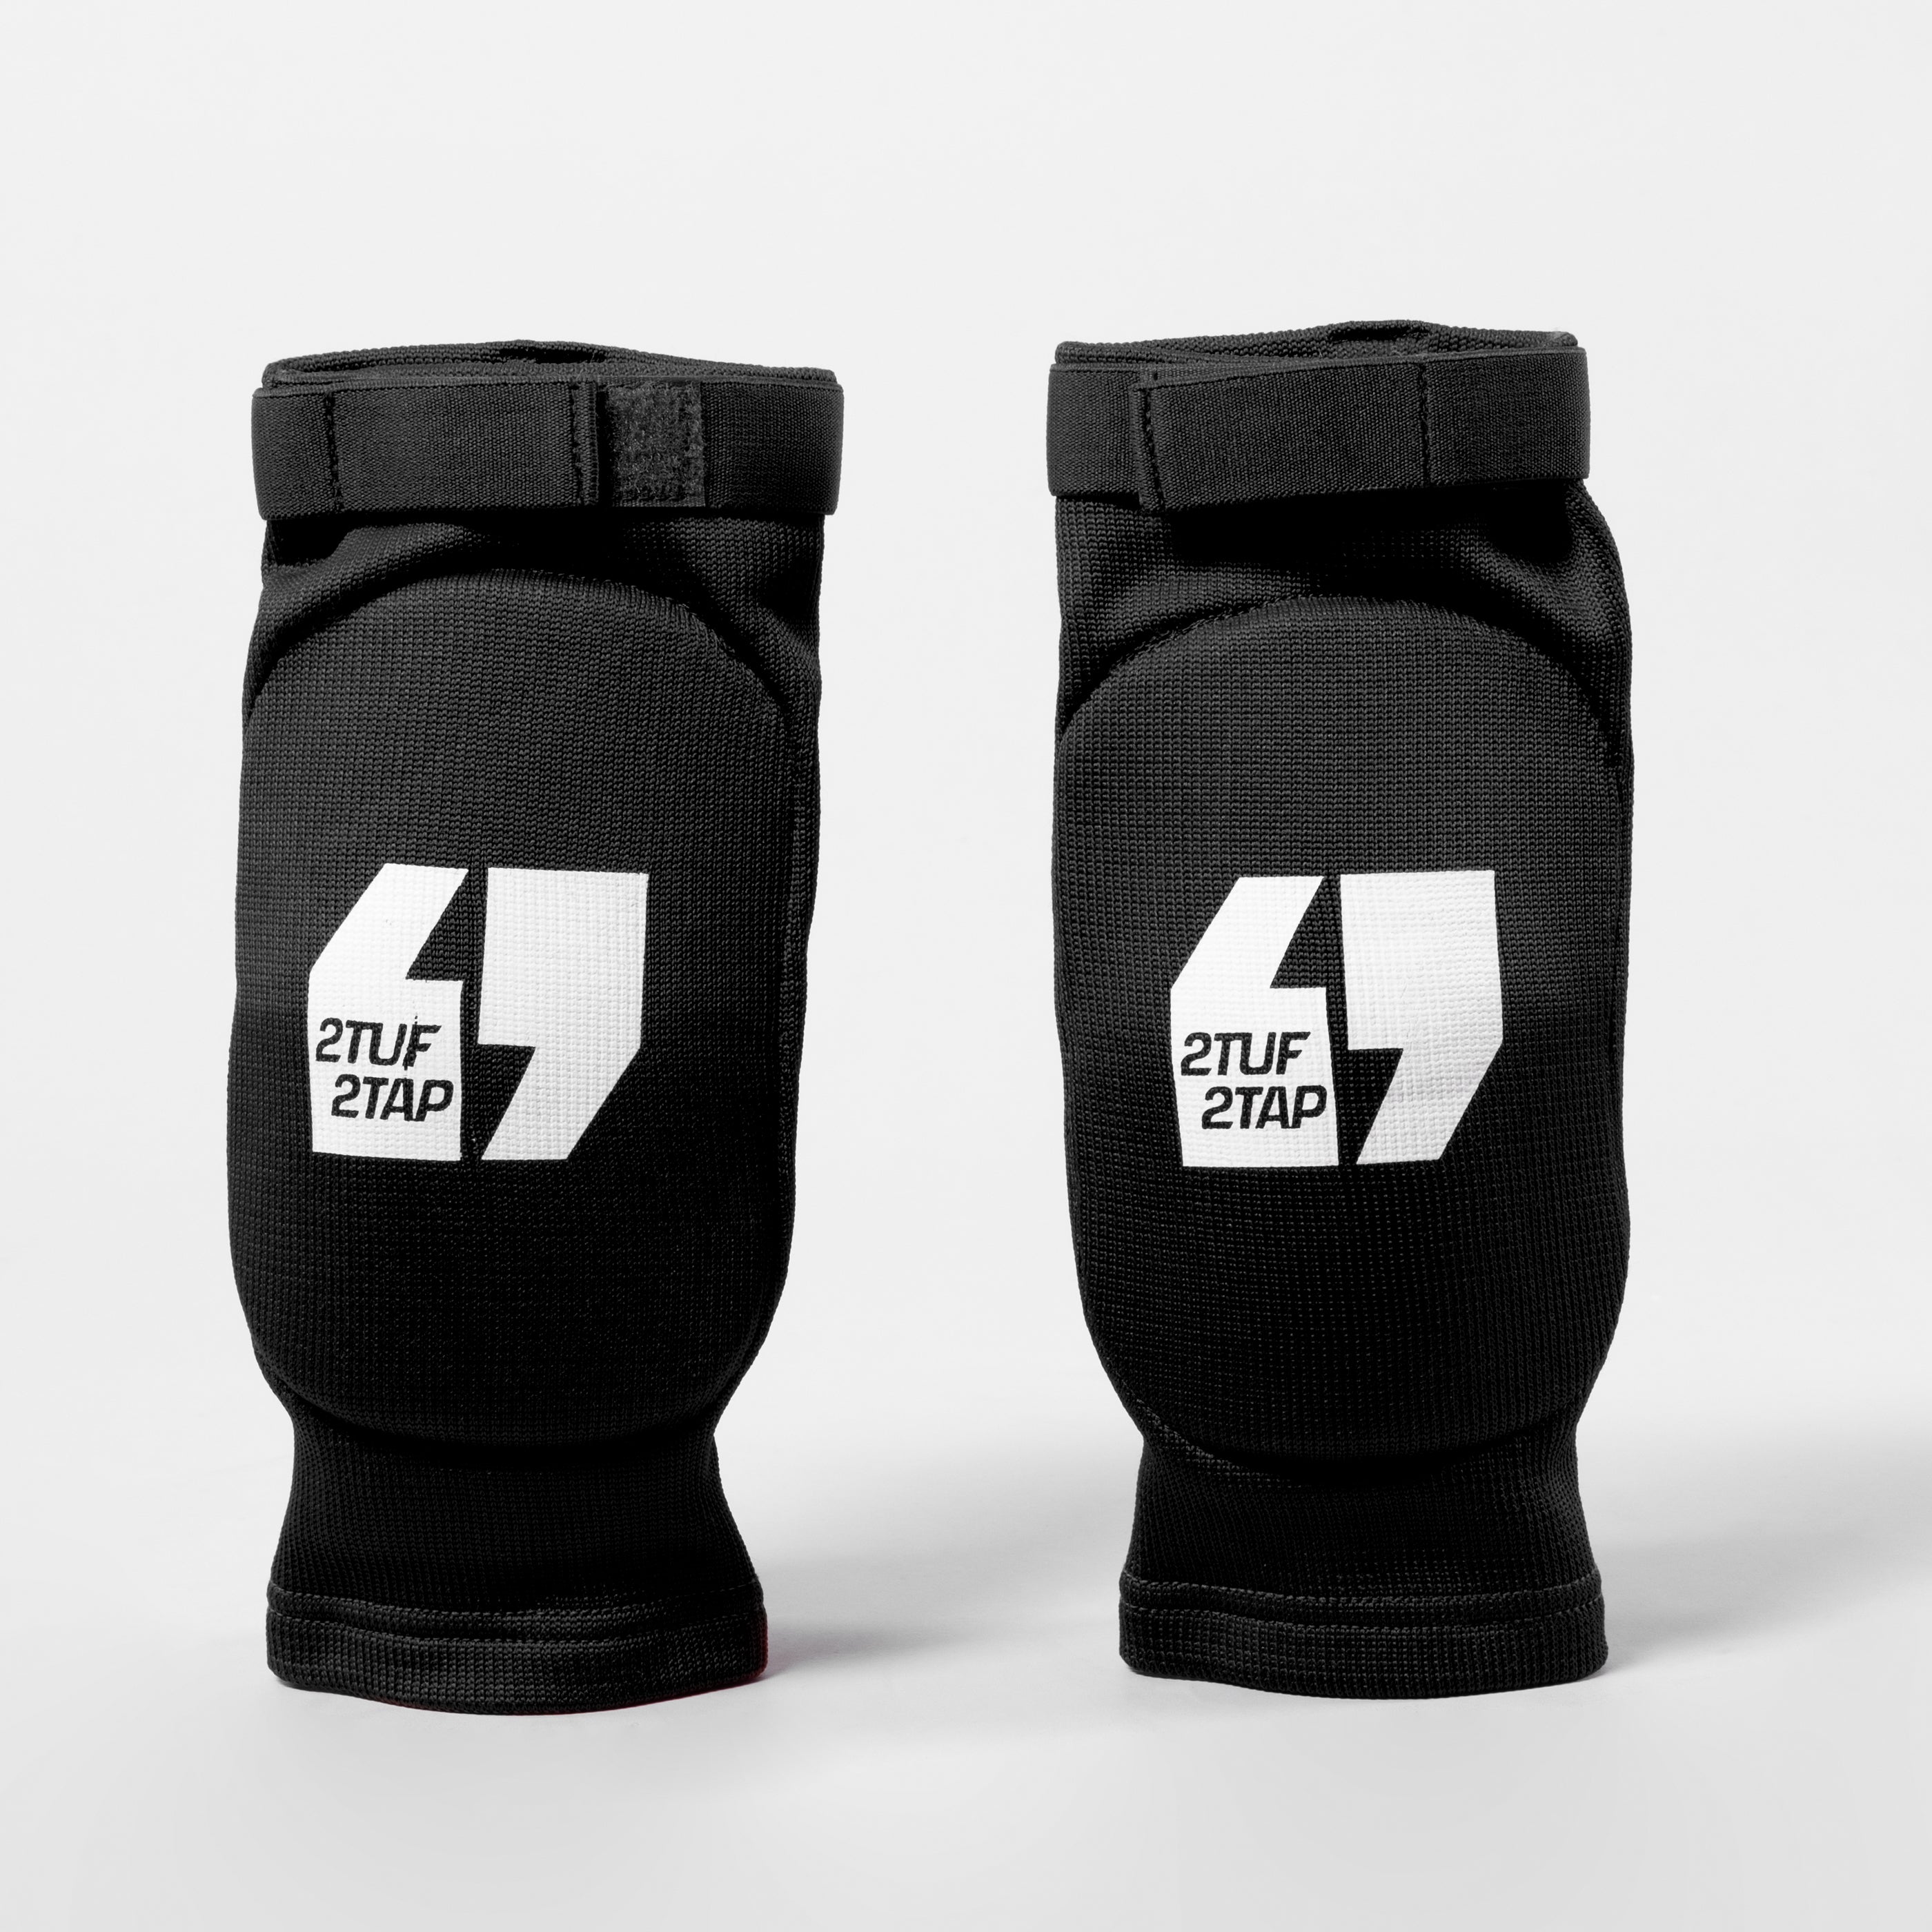 'Pro-Fit' Elbow/Knee Supporting Pads - Black/White 2TUF2TAP